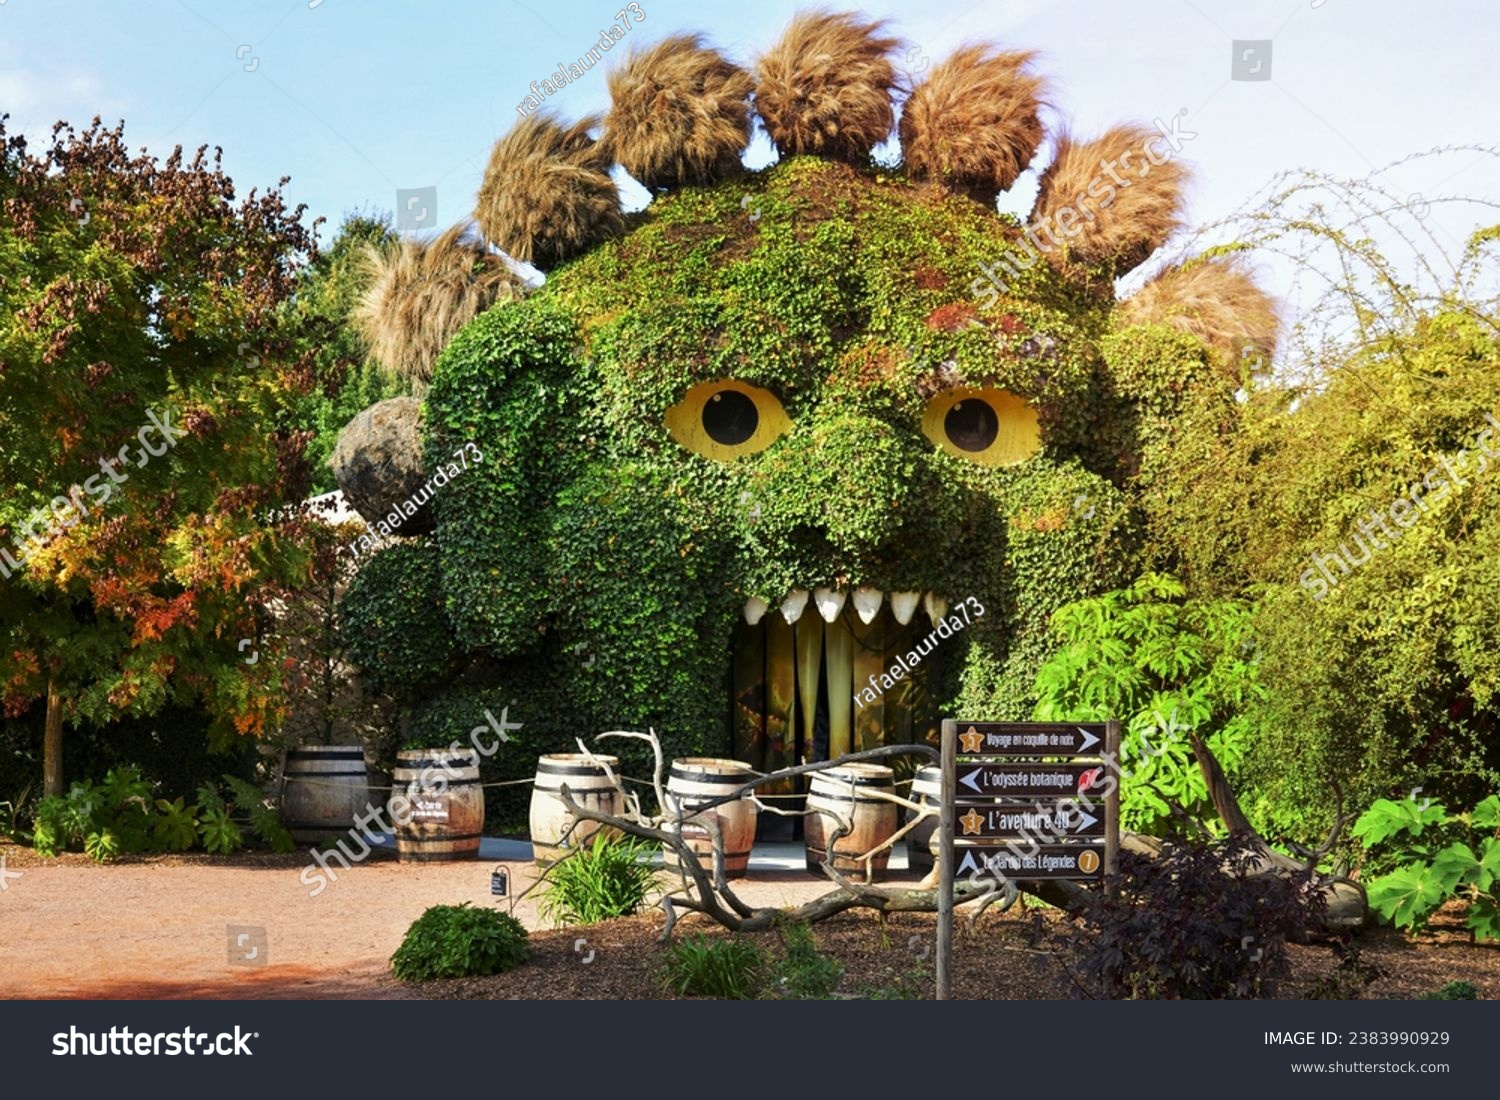 TERRA BOTANICA, ANGERS, FRANCE - SEPTEMBER 24, 2023: Head of a monster covered with ivy in a park landscape design. Grass figure #2383990929